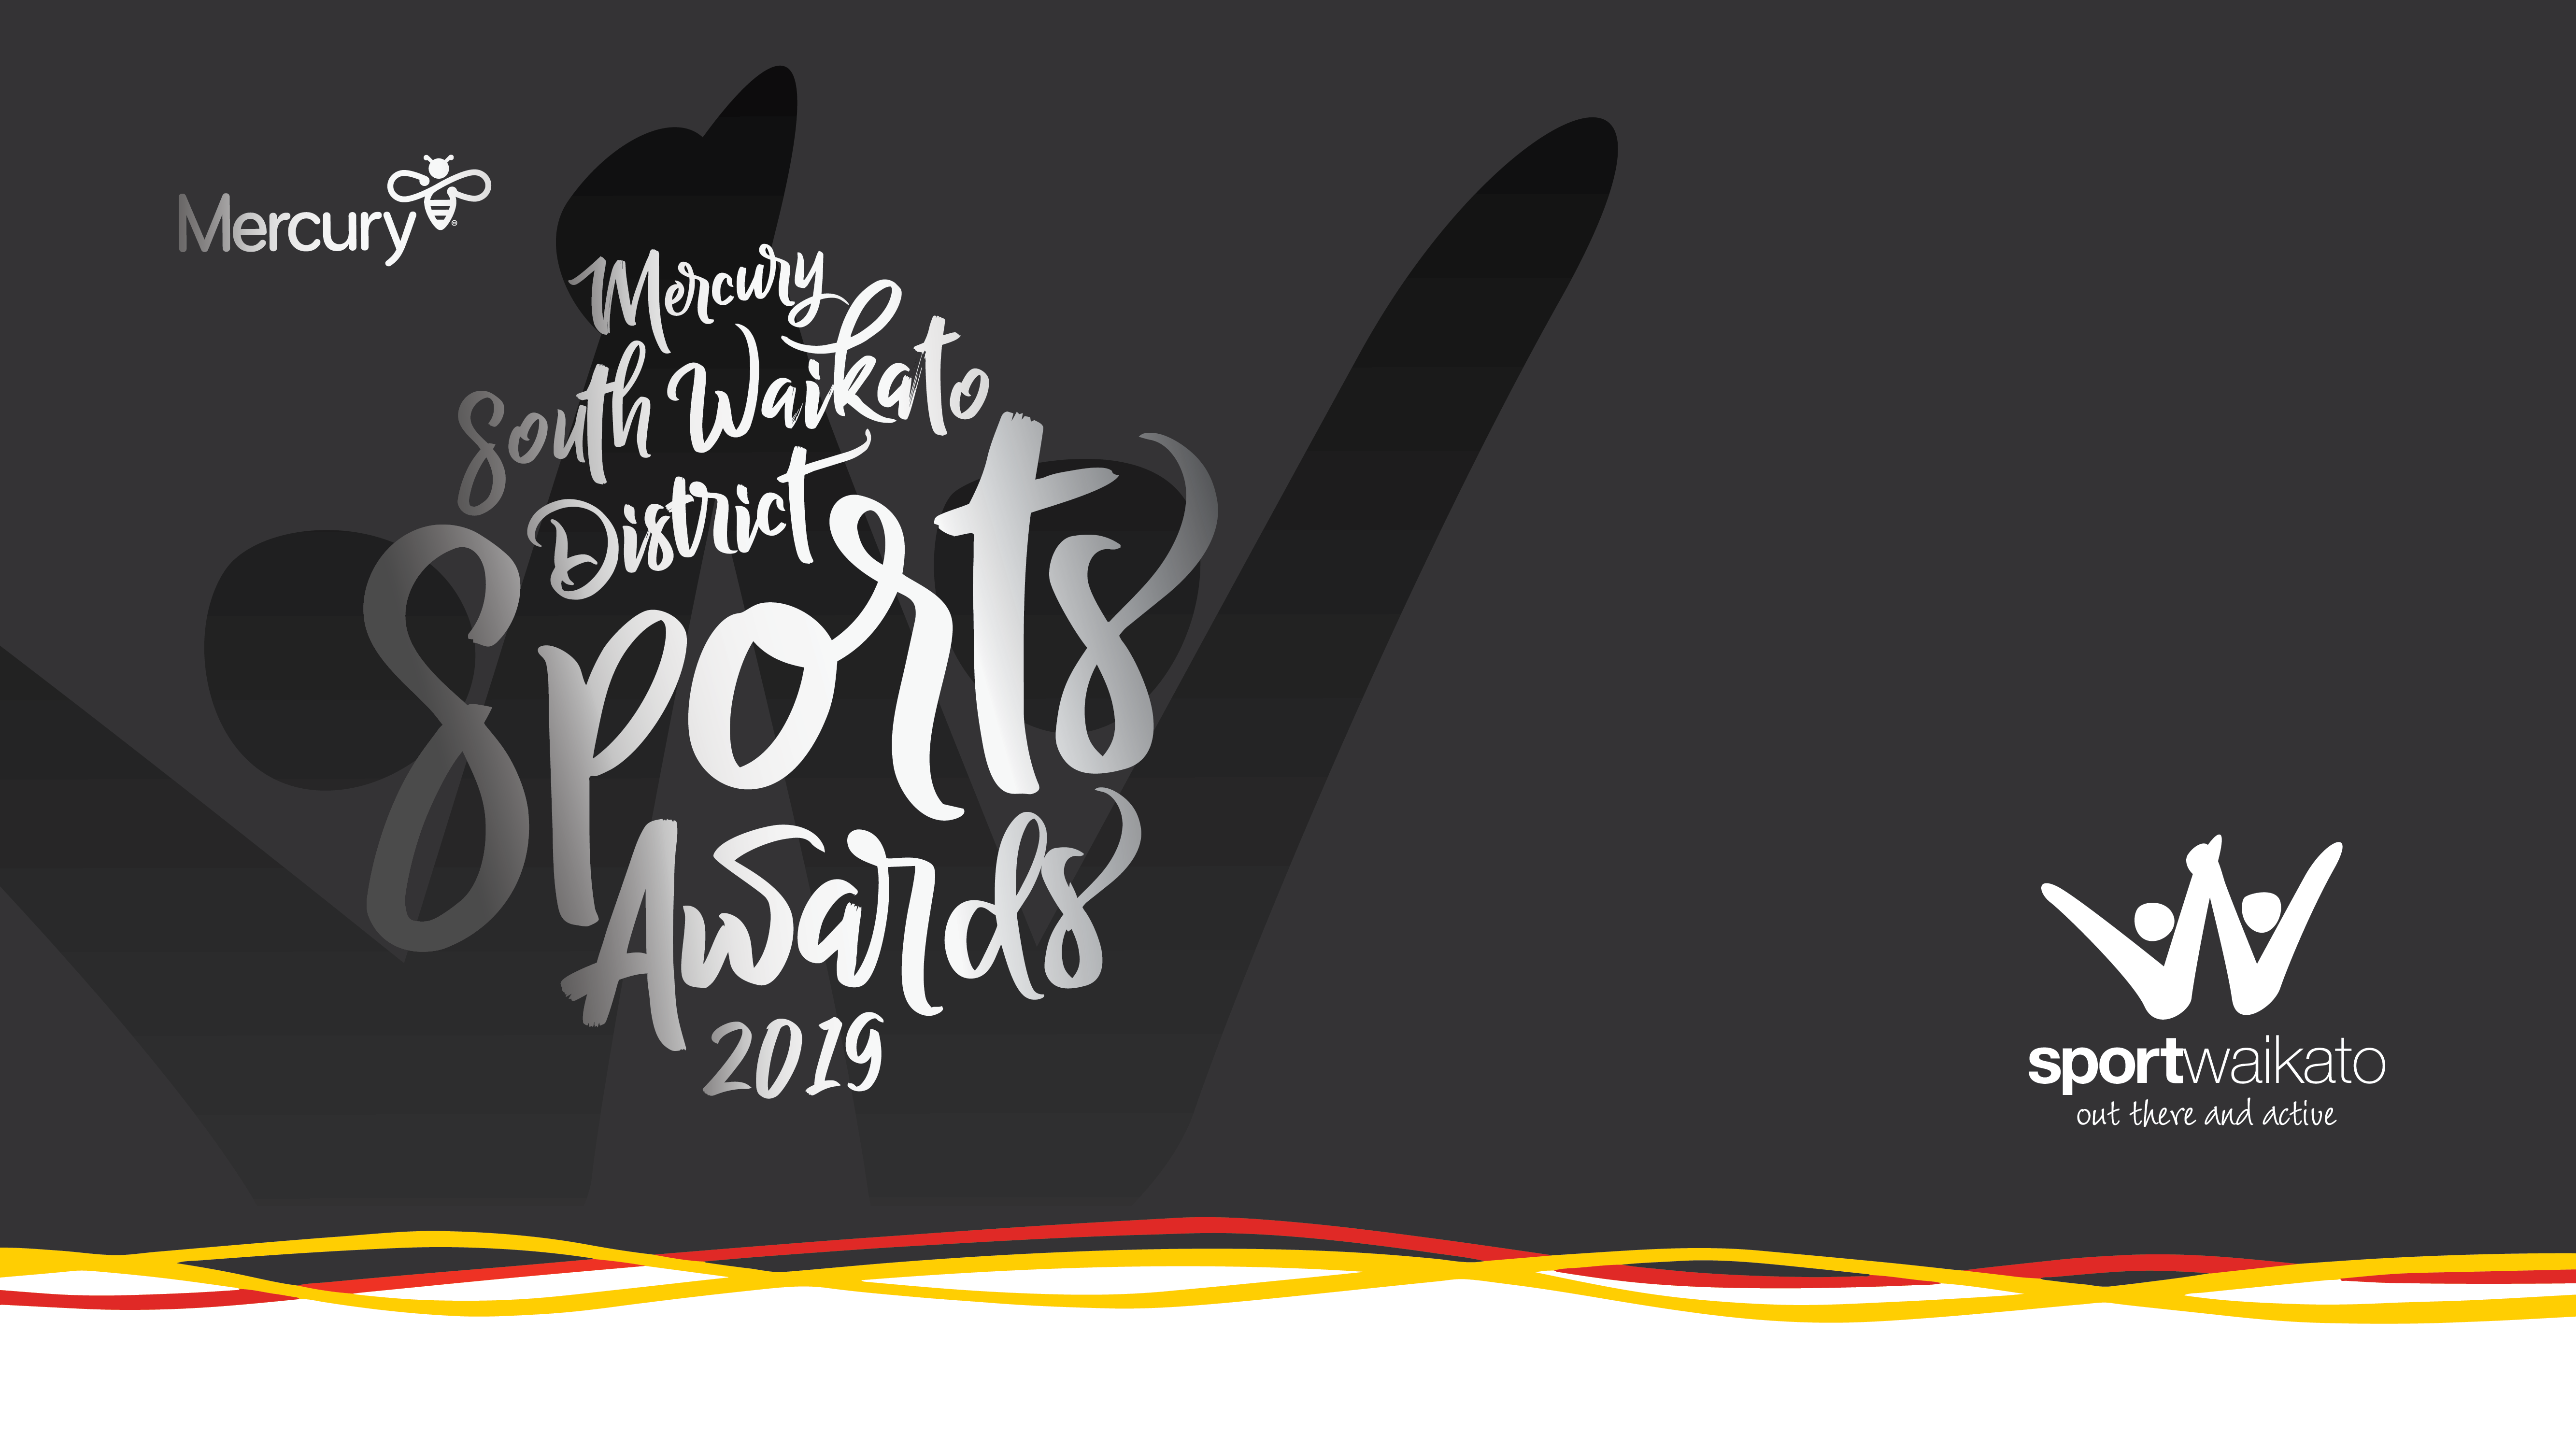 Mercury South Waikato District Sports Awards 2019 nominations are in!